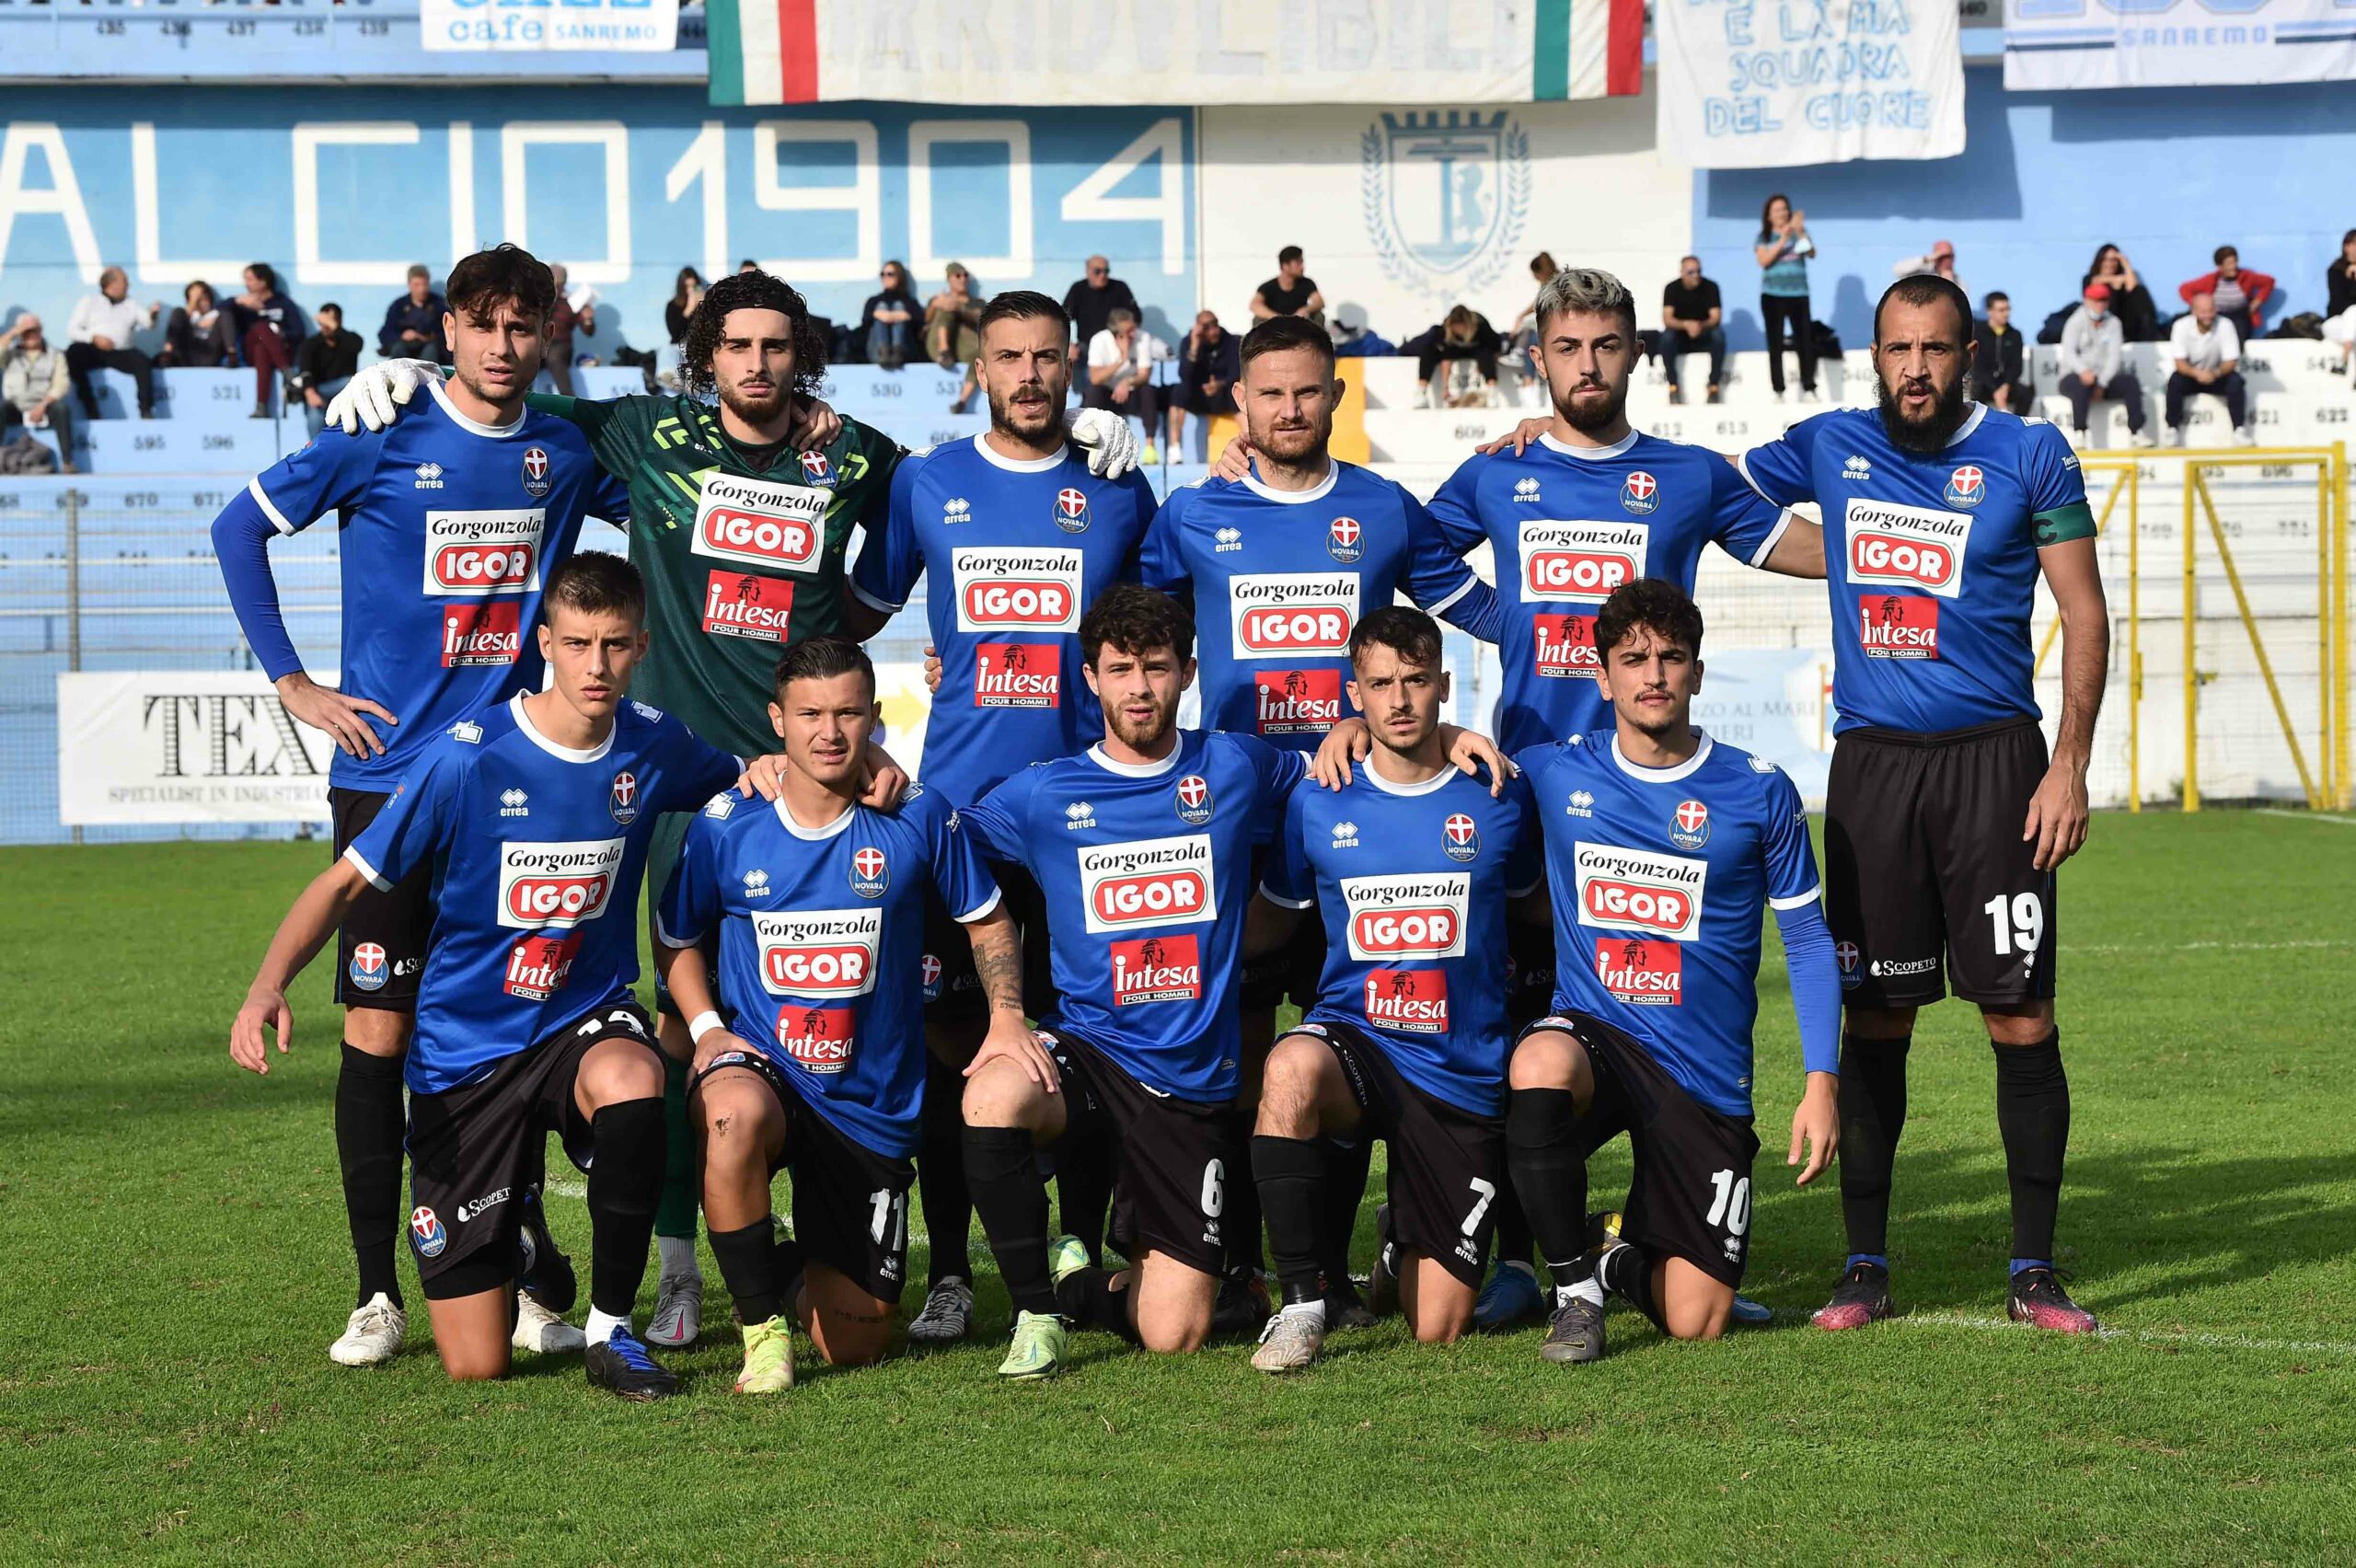 Read more about the article Sanremese-Novara 3-2 | Gallery